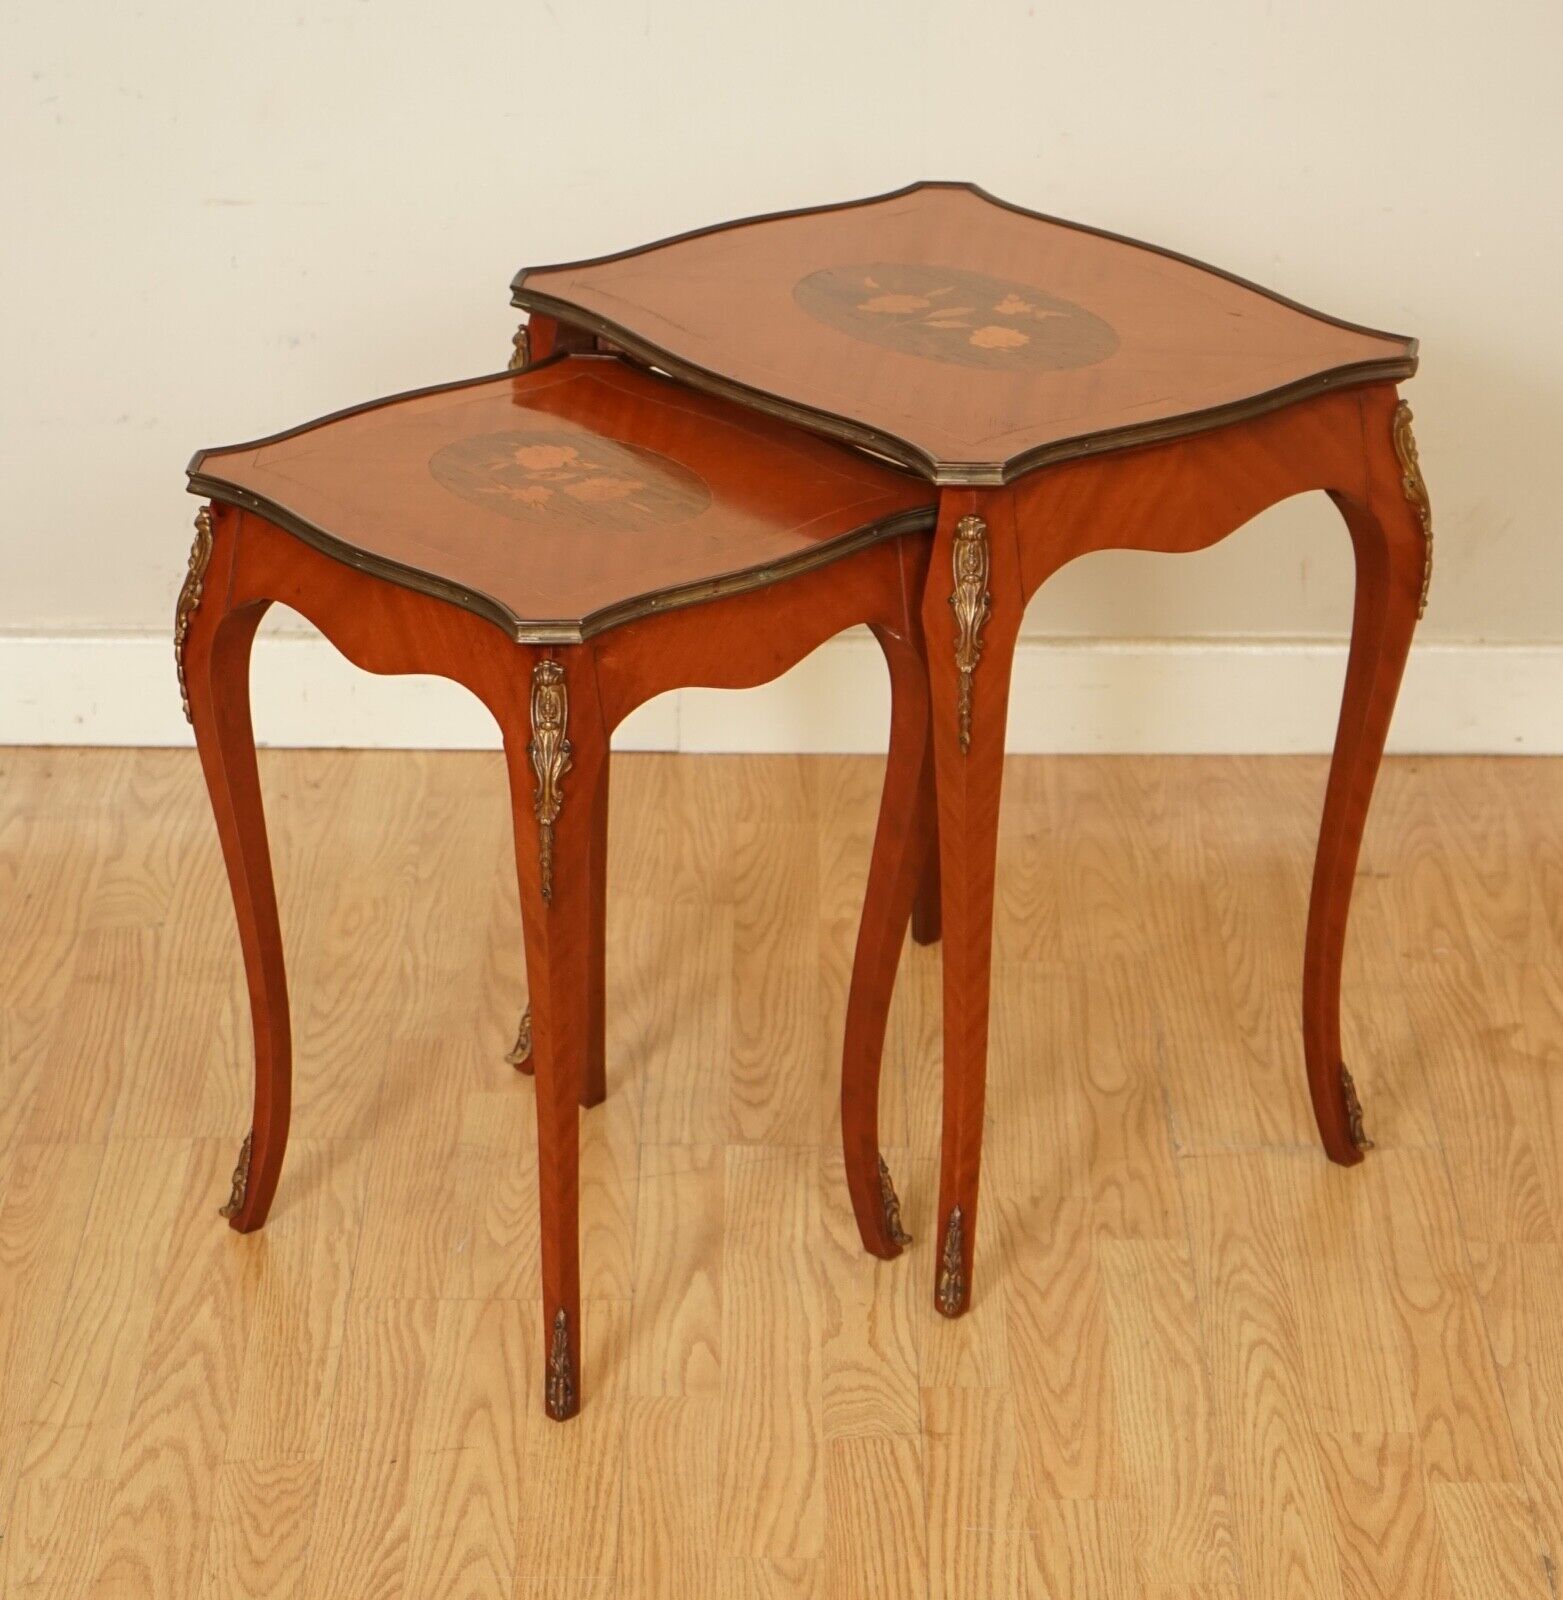 LOVELY VINTAGE FRENCH INLAID PARQUETRY SET OF 2 NESTING TABLES